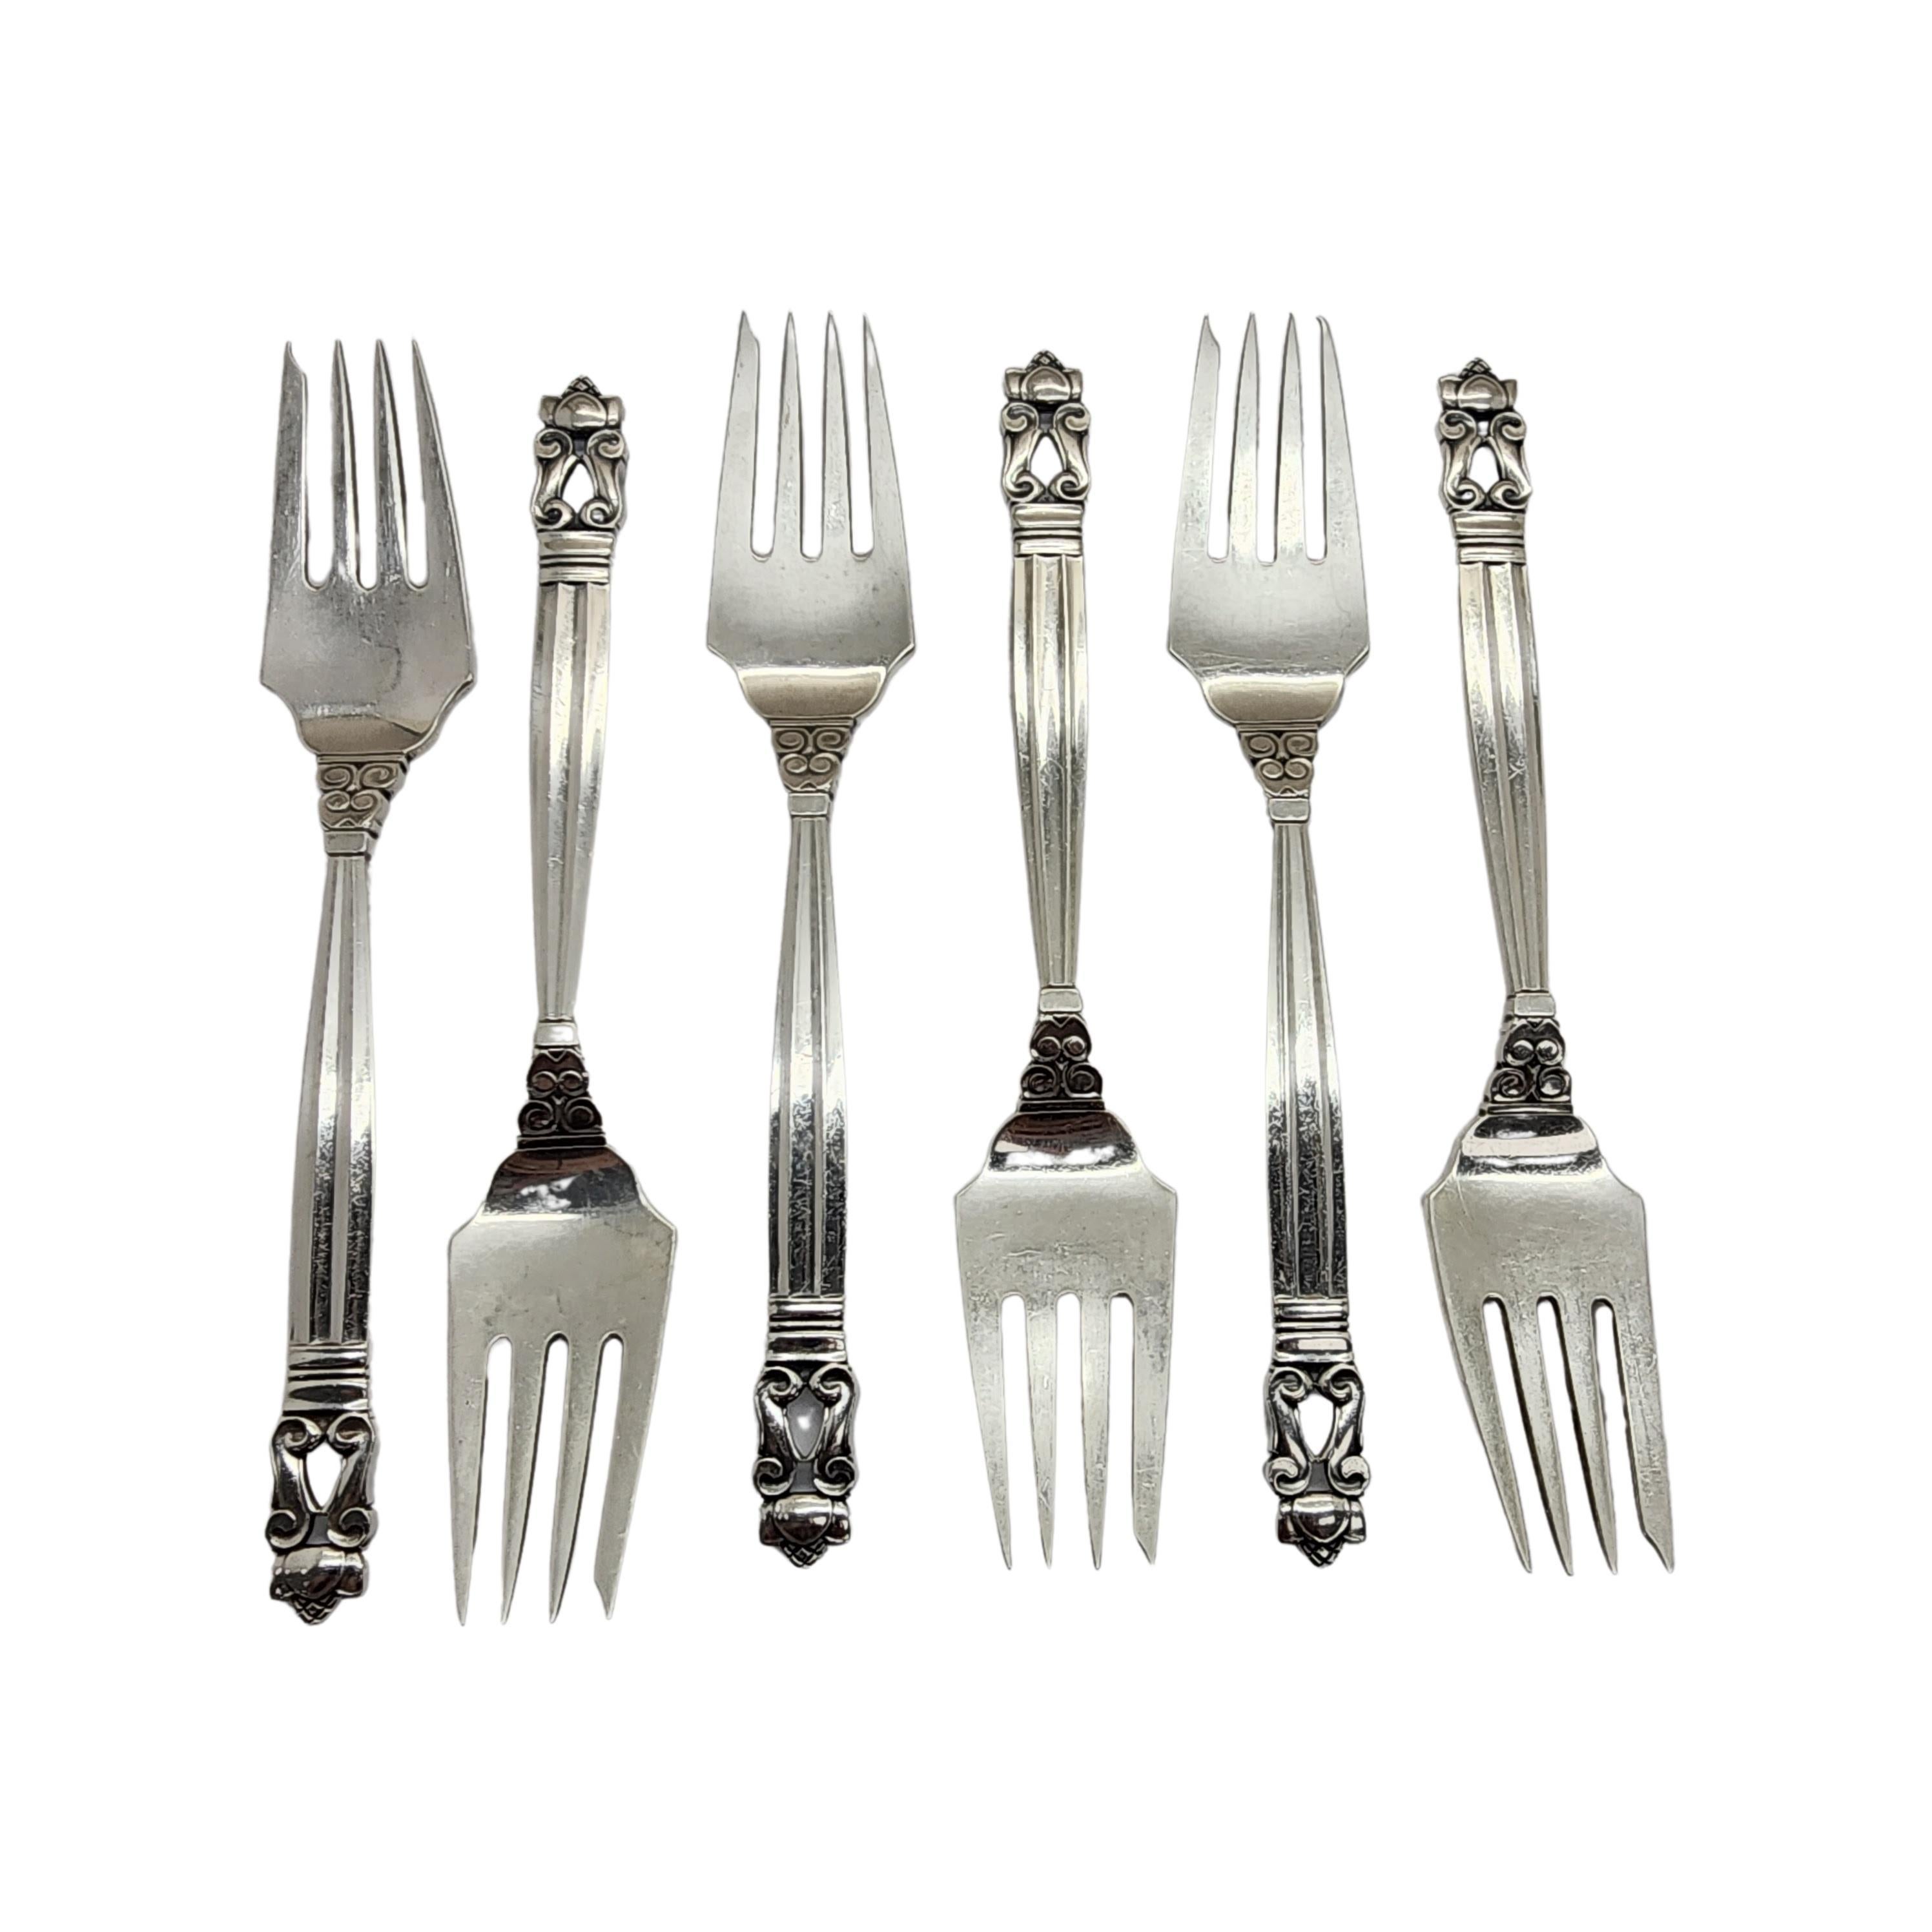 Set of 6 sterling silver salad forks in the Acorn pattern by Georg Jensen.

The Acorn pattern was introduced in 1915 as a collaboration between Georg Jensen and designer Johan Ronde. The Acorn pattern, which combines Art Nouveau and Art Deco styles,